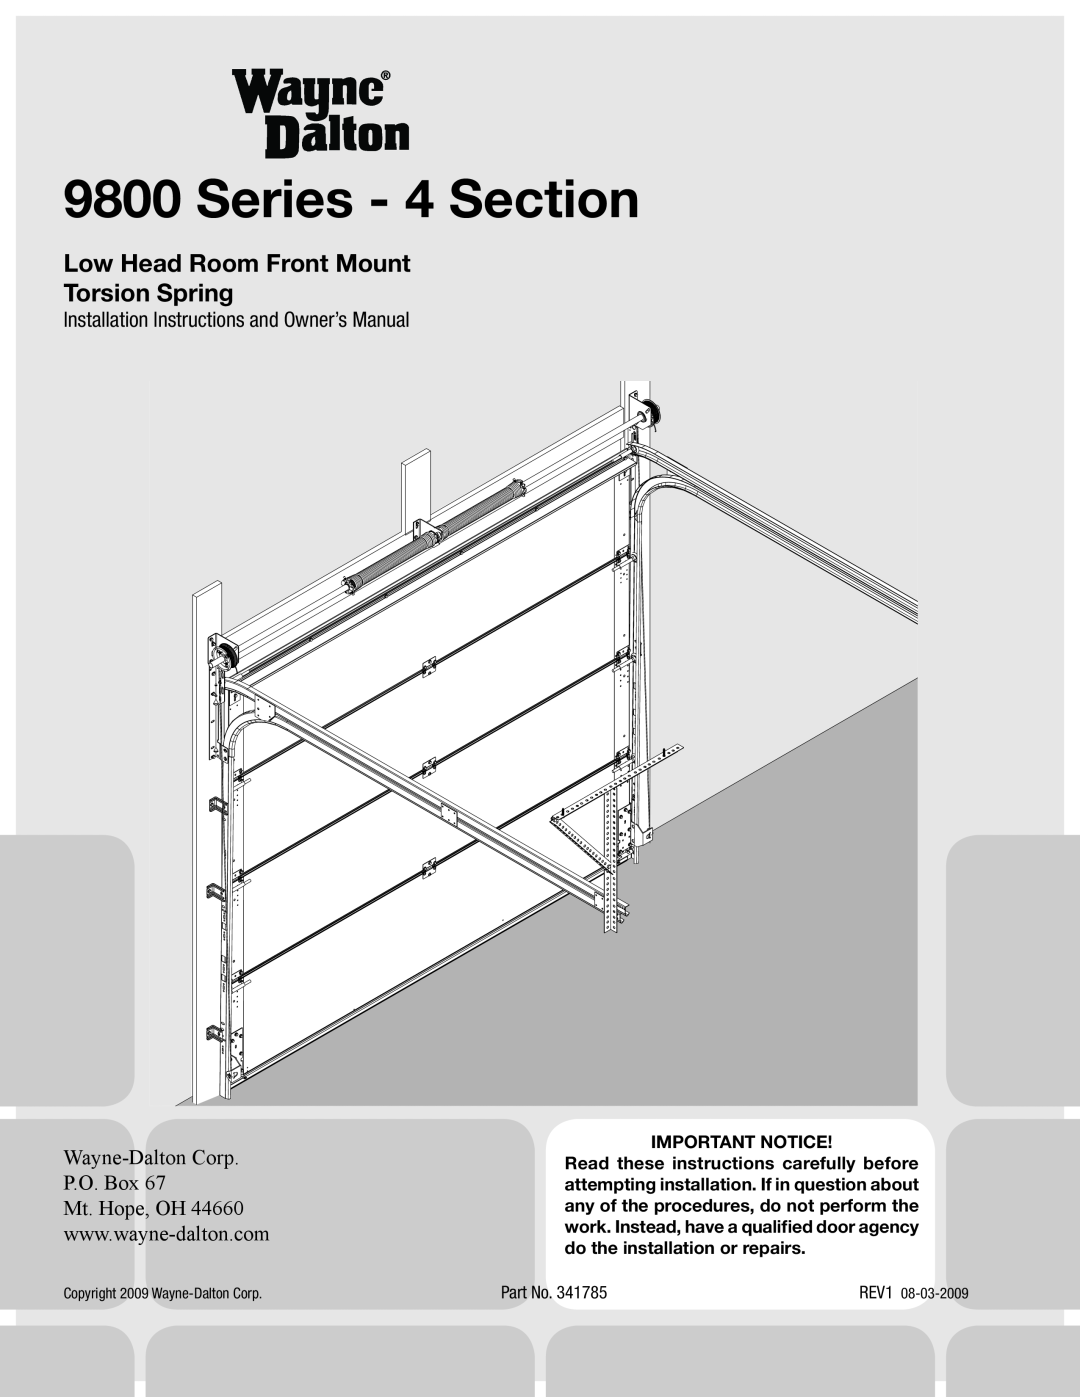 Wayne-Dalton 341785 installation instructions Series - 4 Section, Low Head Room Front Mount Torsion Spring 